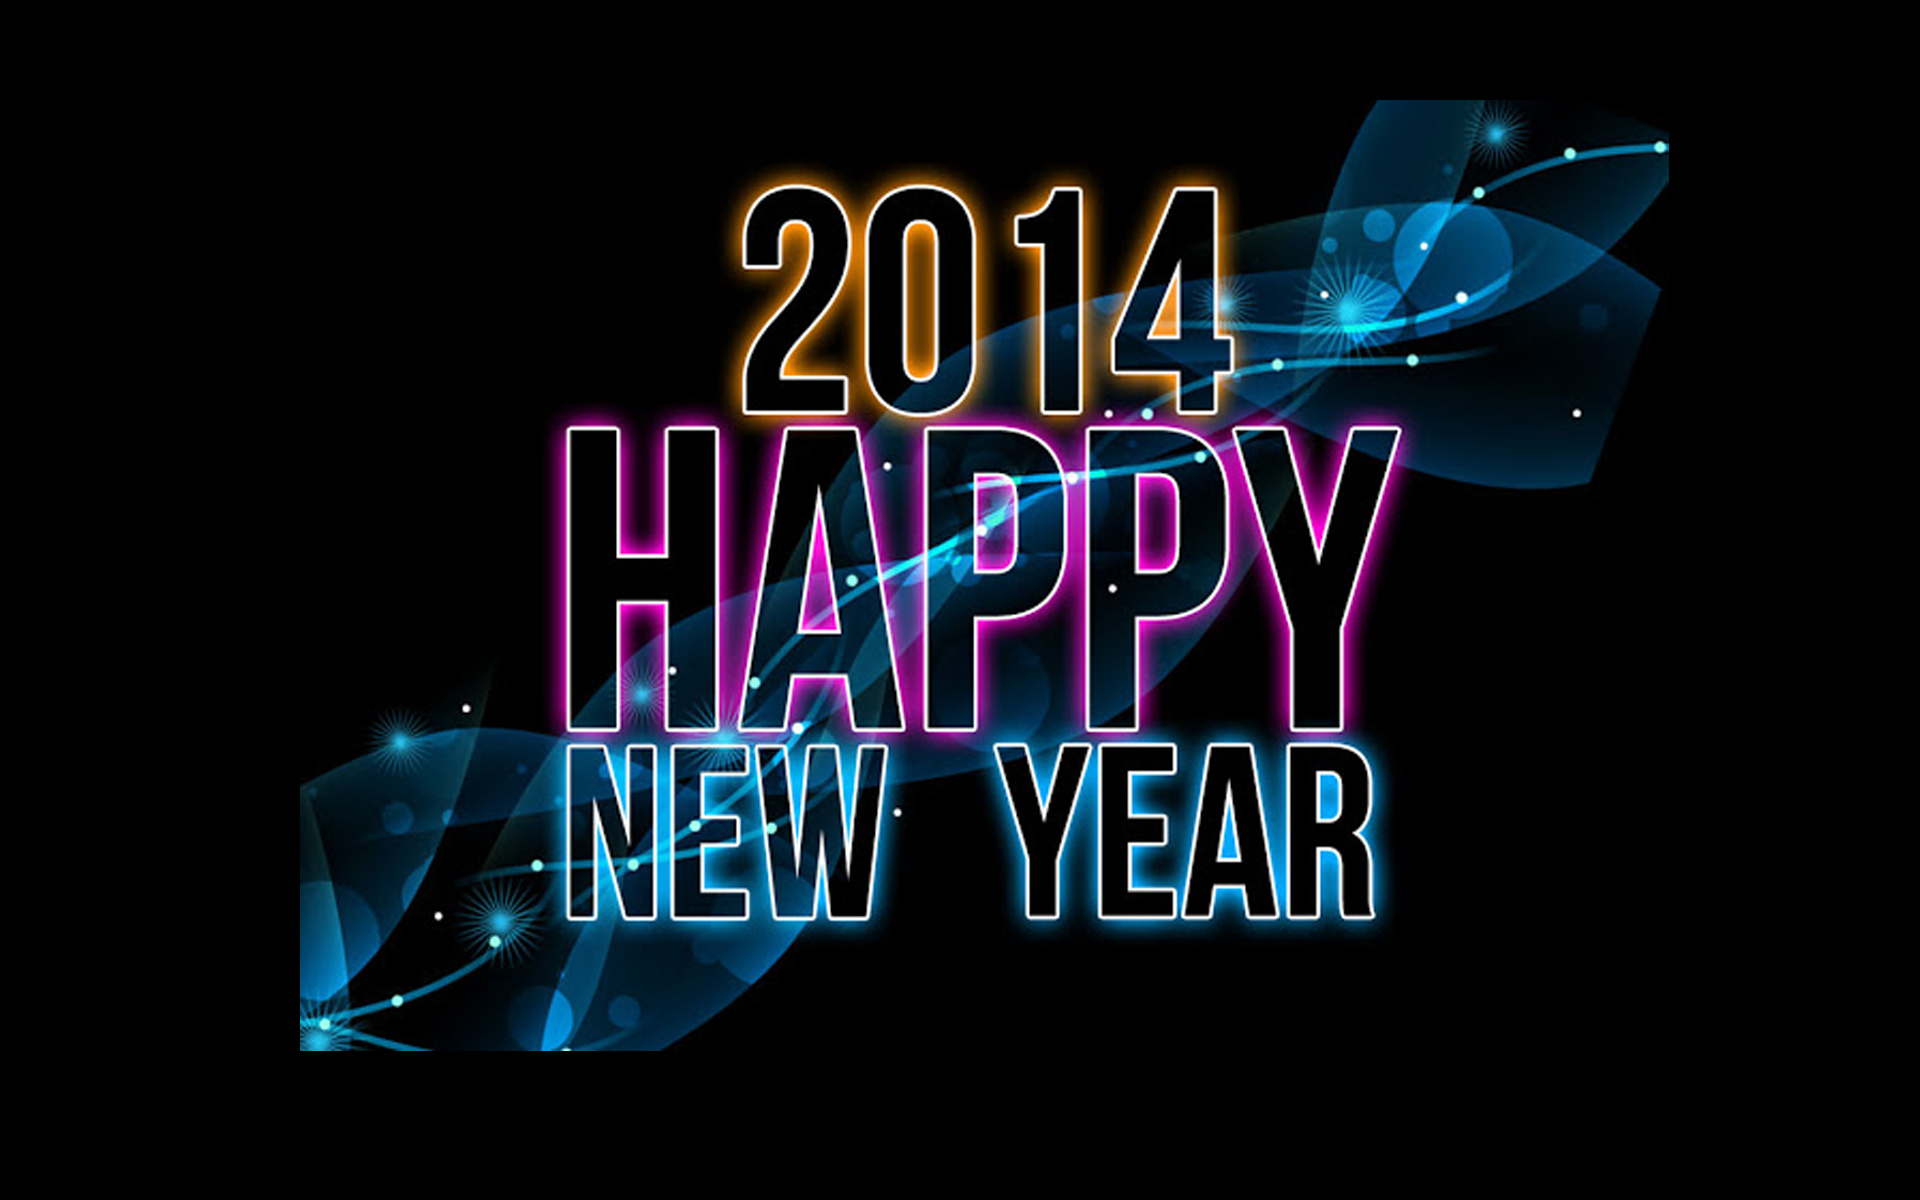 Beautiful-Happy-New-Year-2014-HD-Wallpapers-by-techblogstop-29